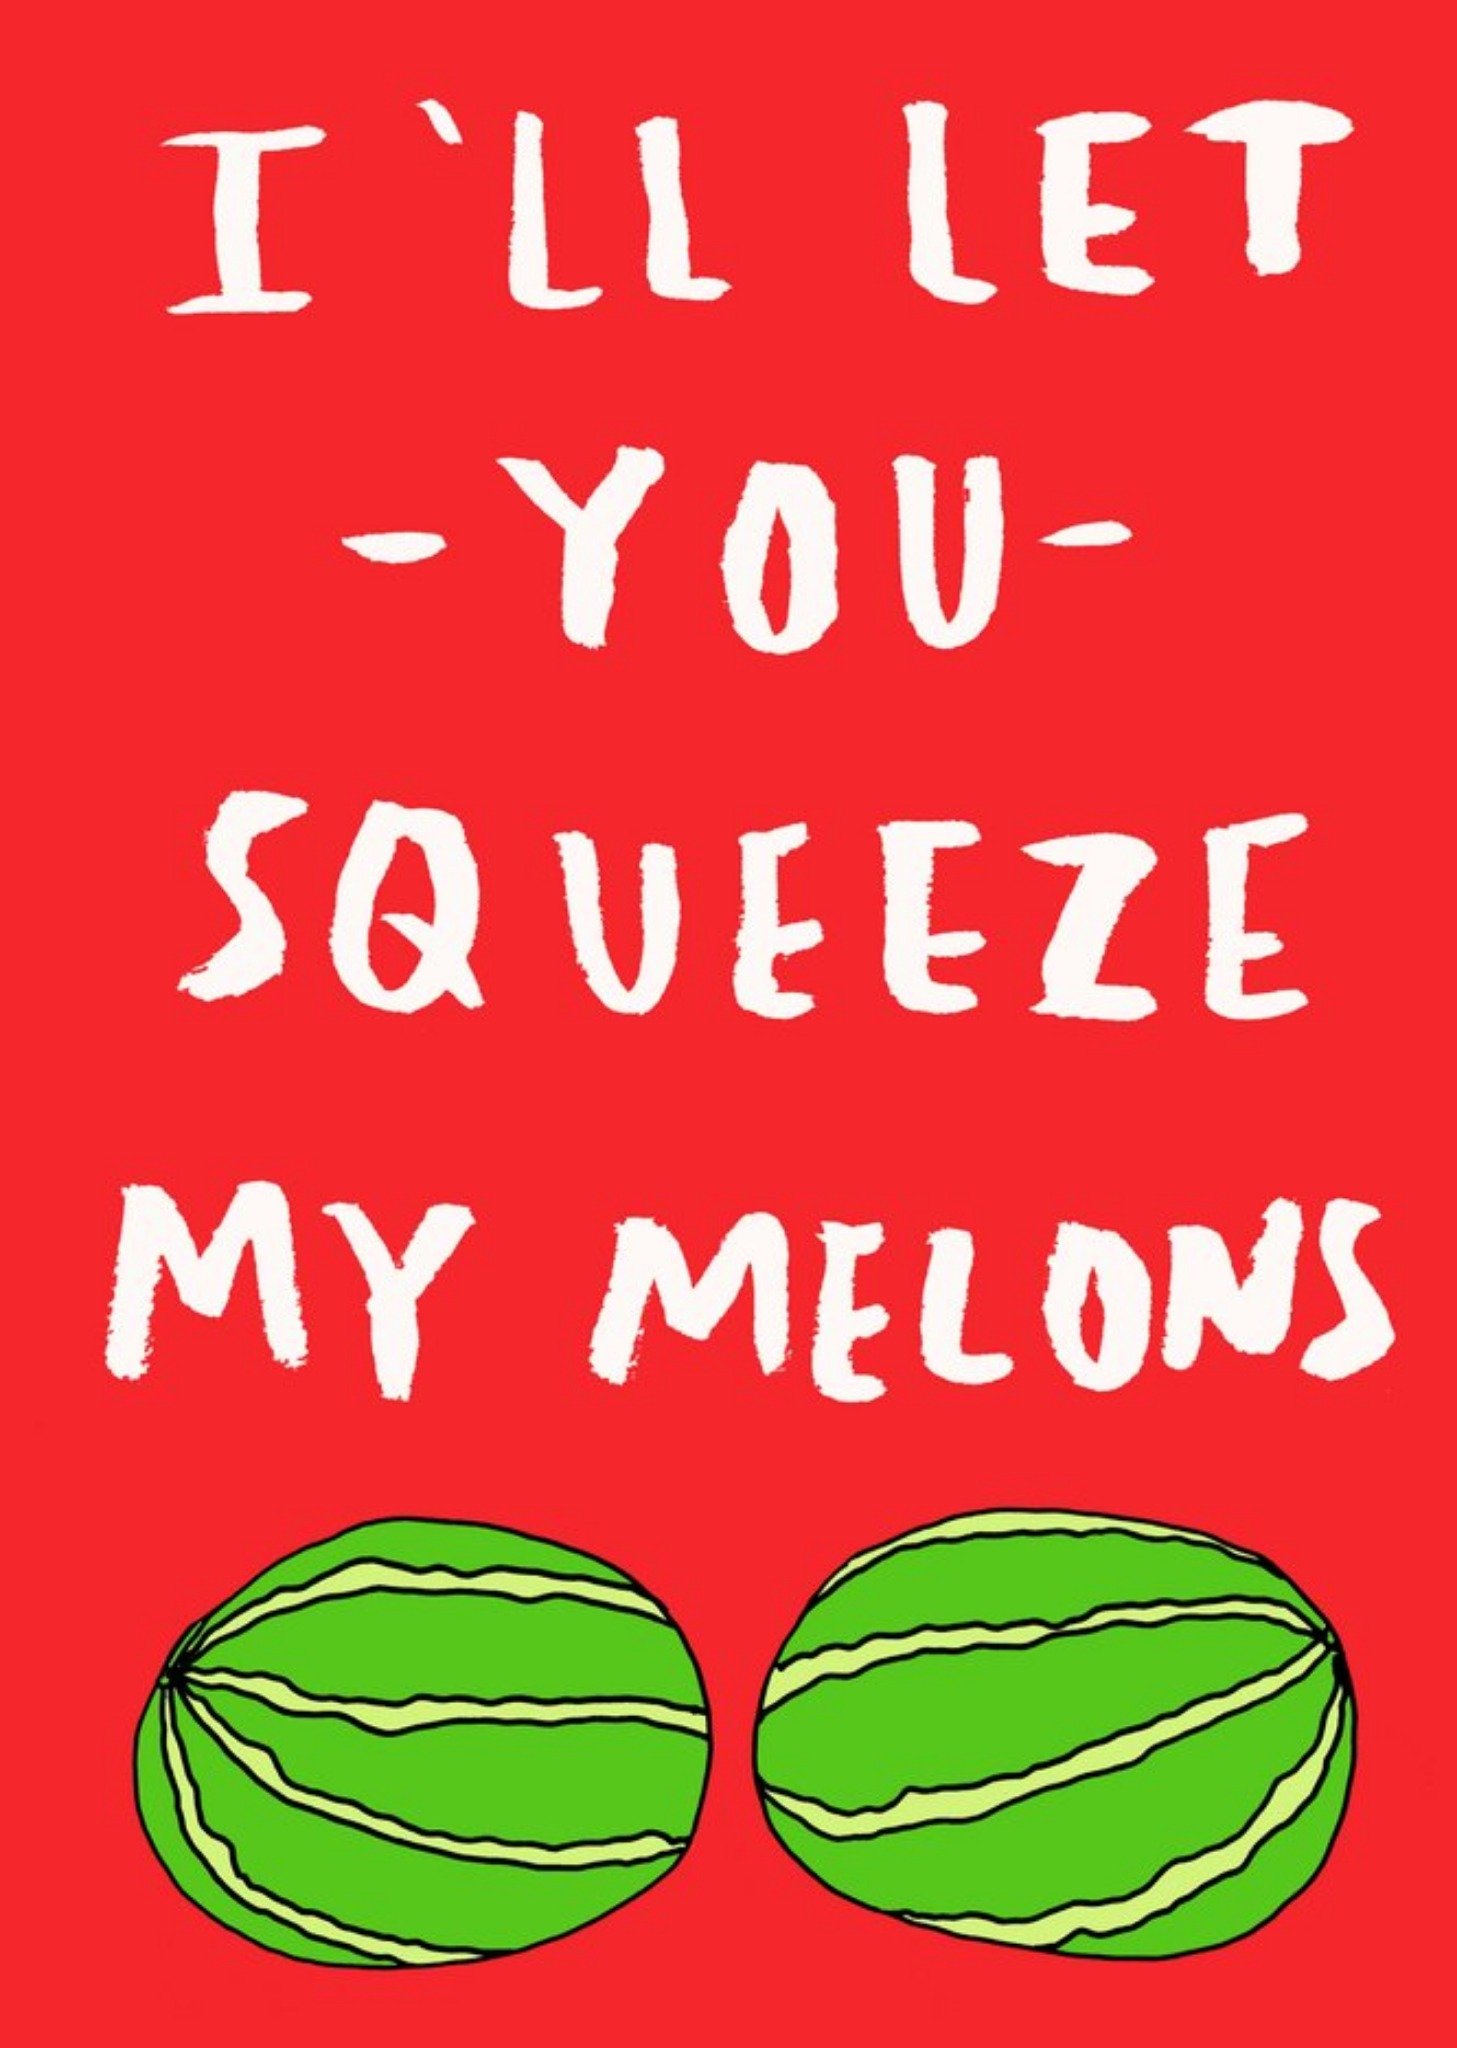 Moonpig Funny Ill Let You Squeeze My Melons Card, Large